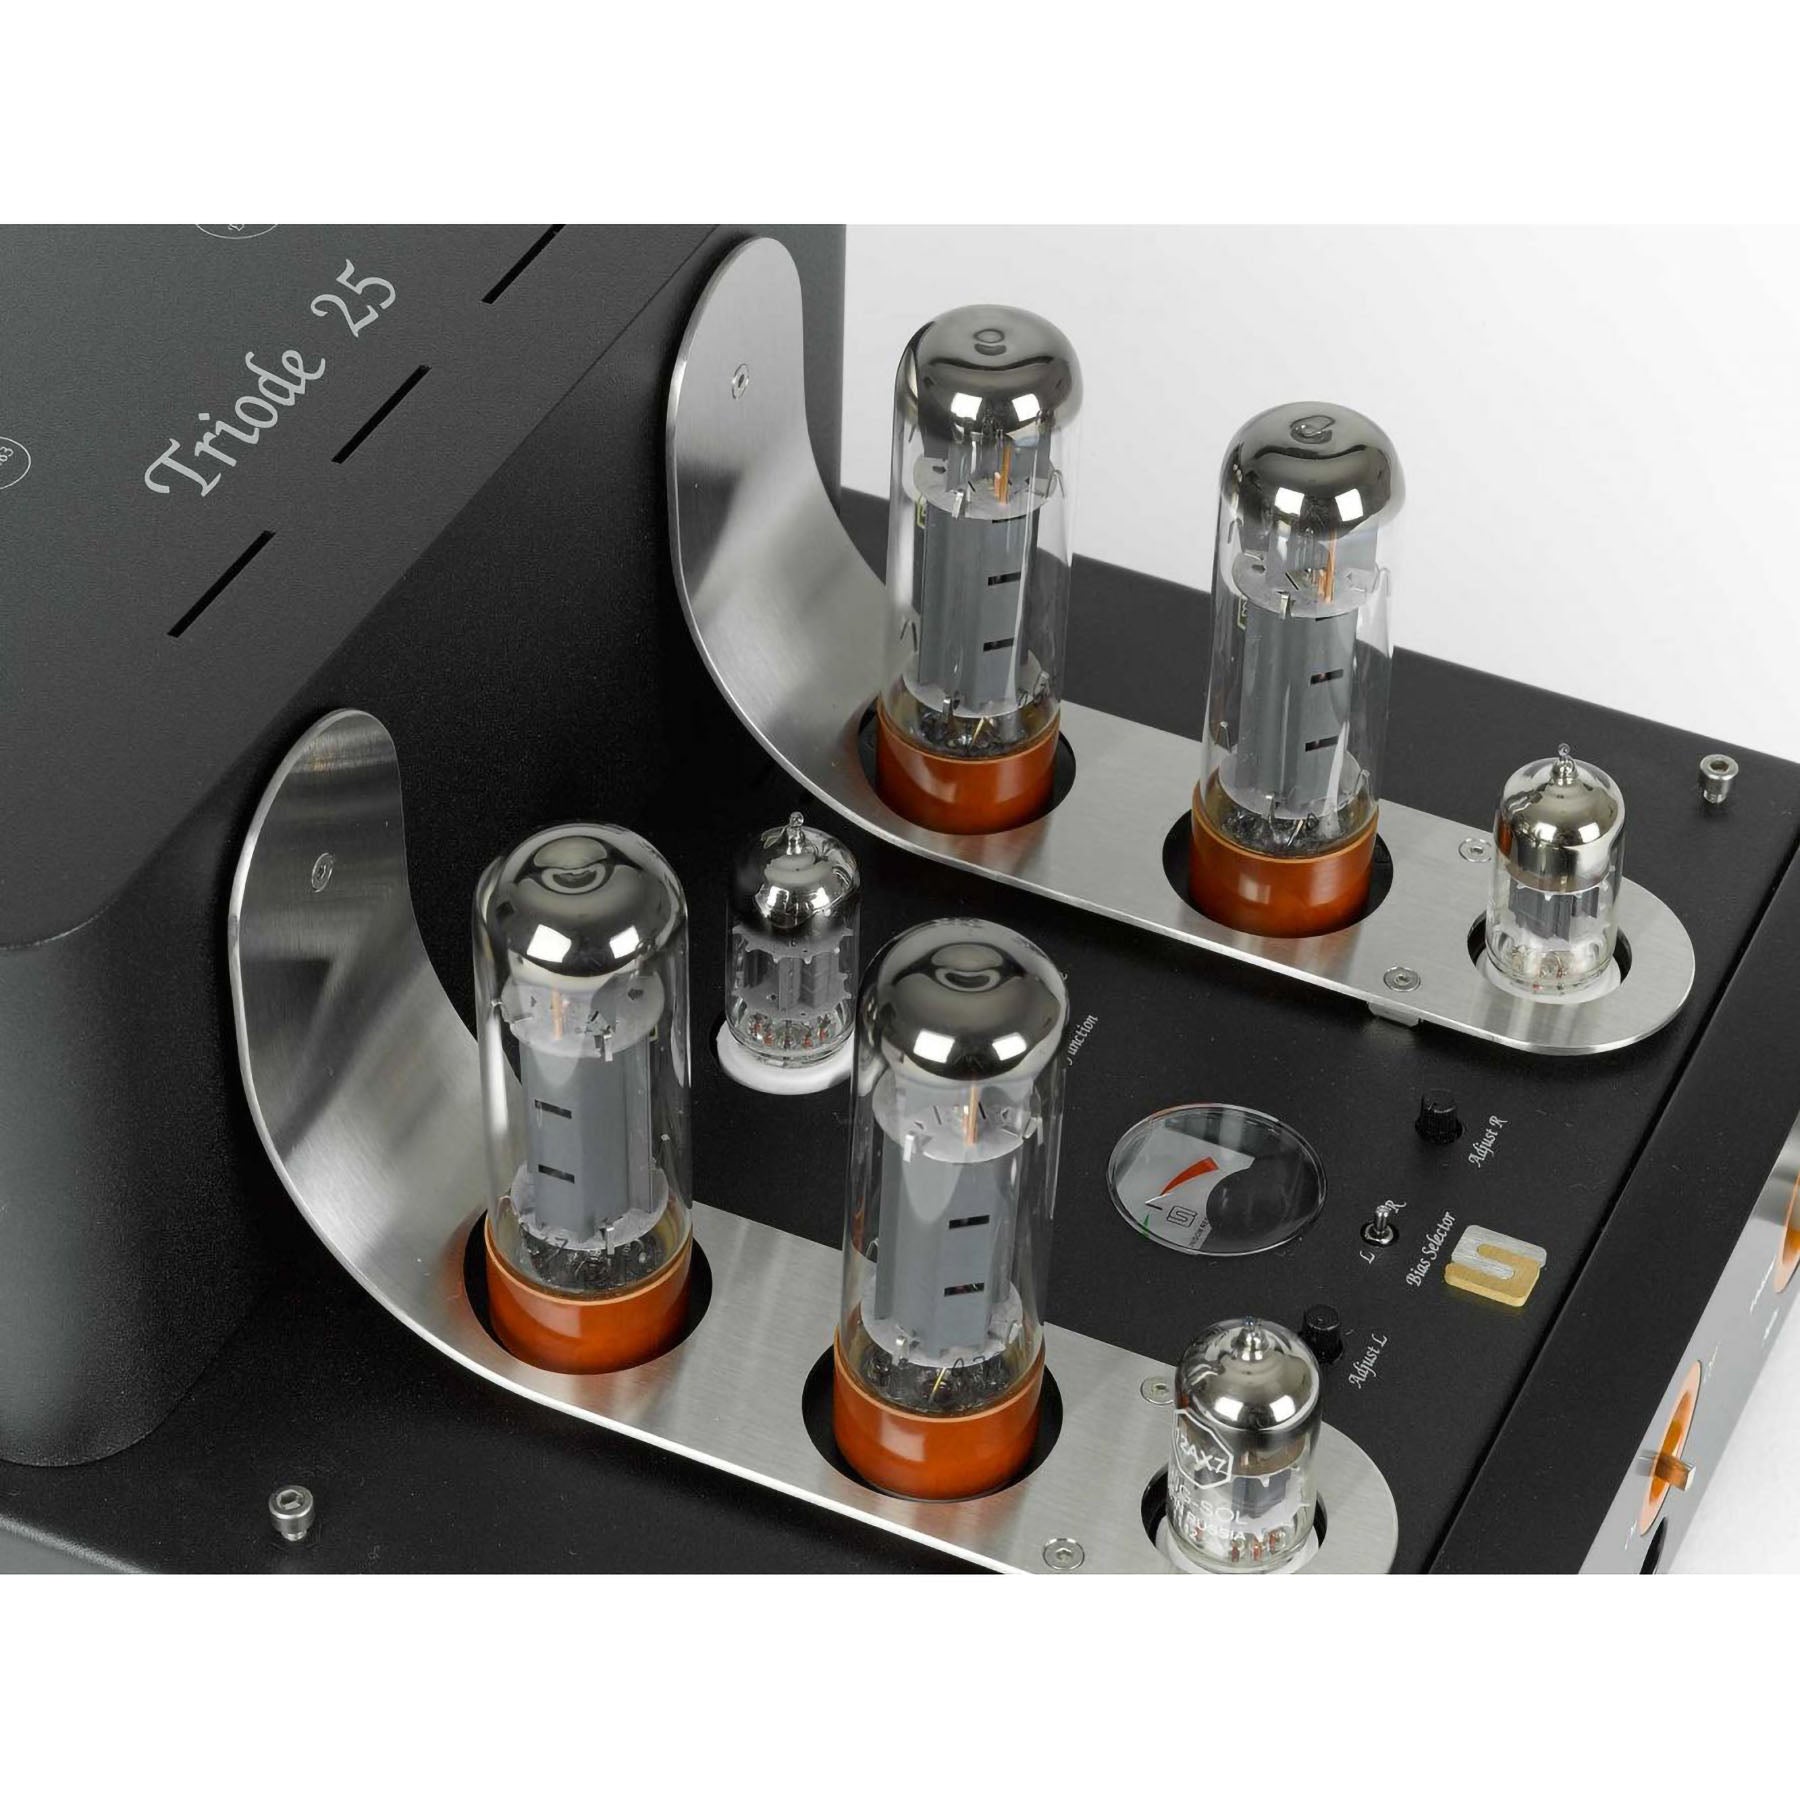 Unison Research Triode 25 Integrated Amplifier